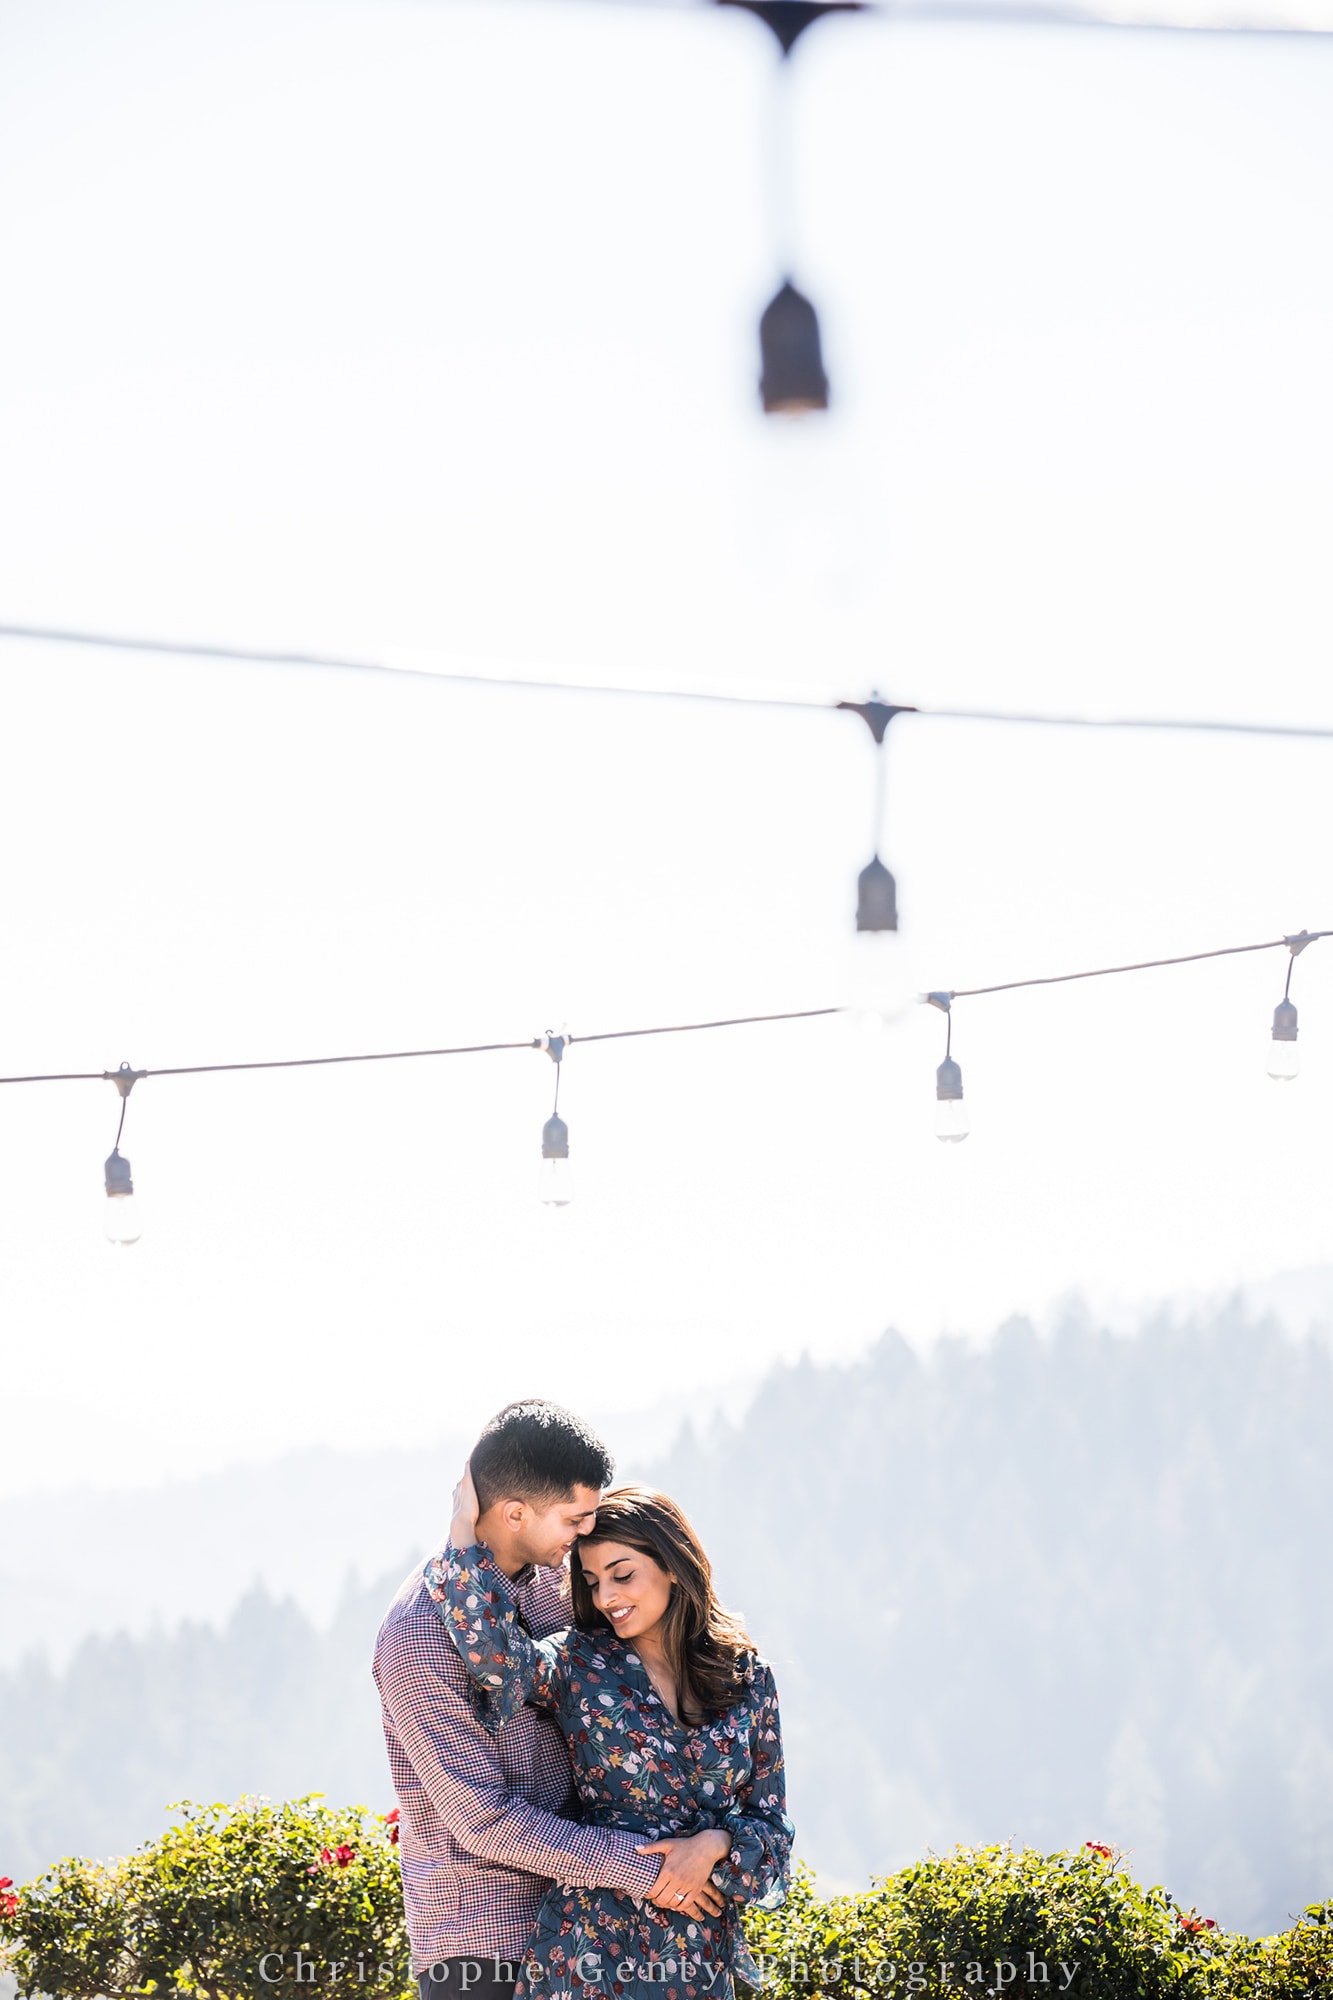 Proposal ideas in the Napa Valley - Newton Winery, St Helena, CA